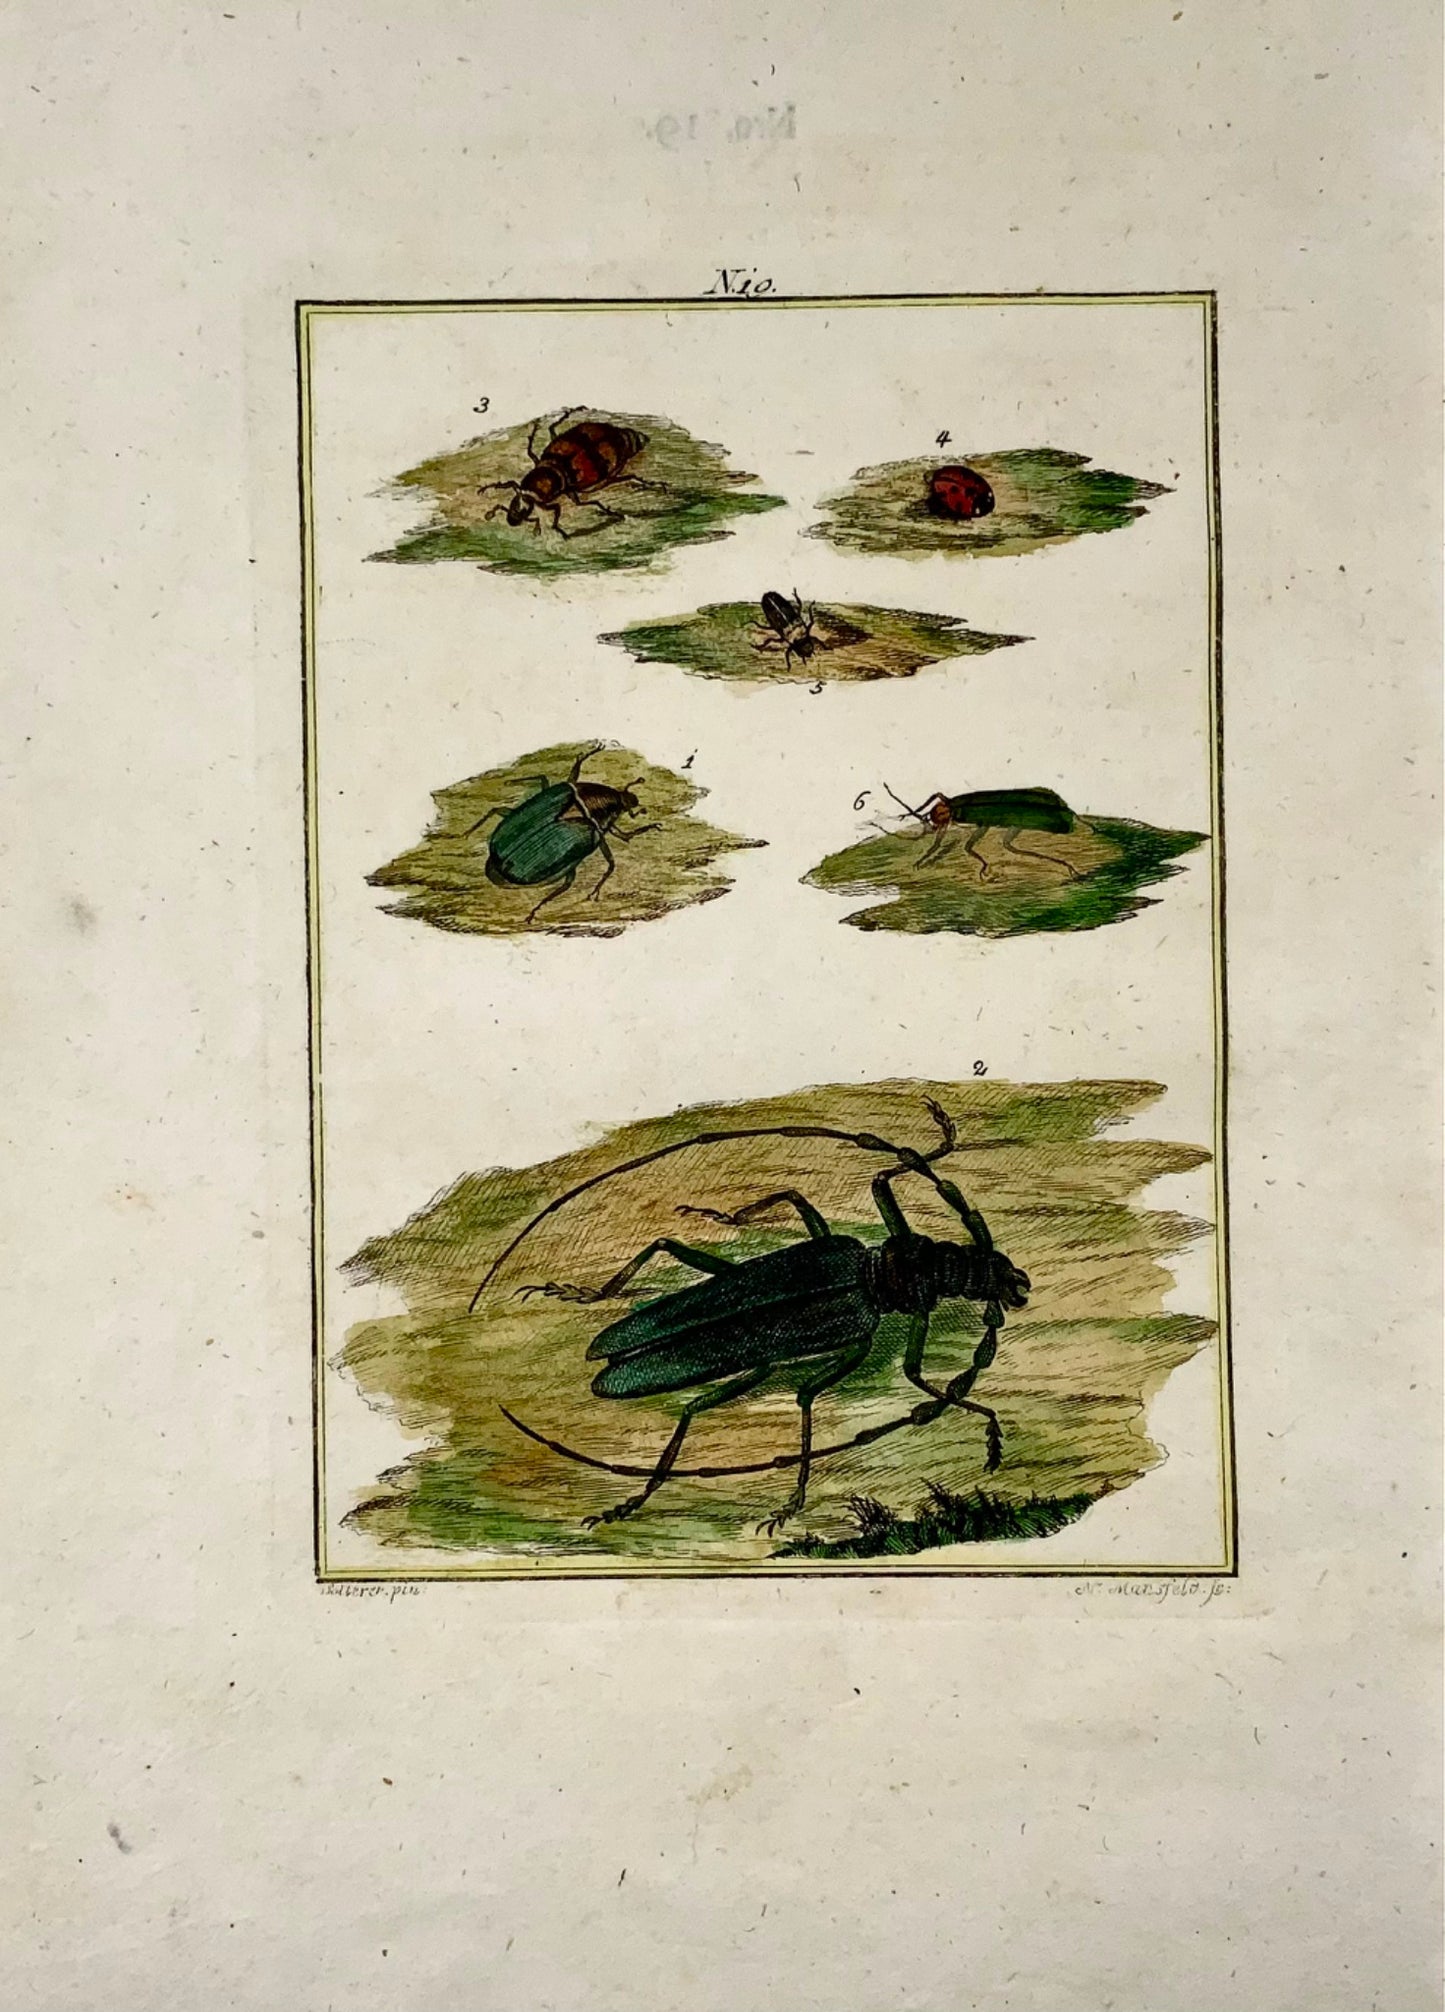 1790 Beetles, insects, Joh. Sollerer hand coloured engraving